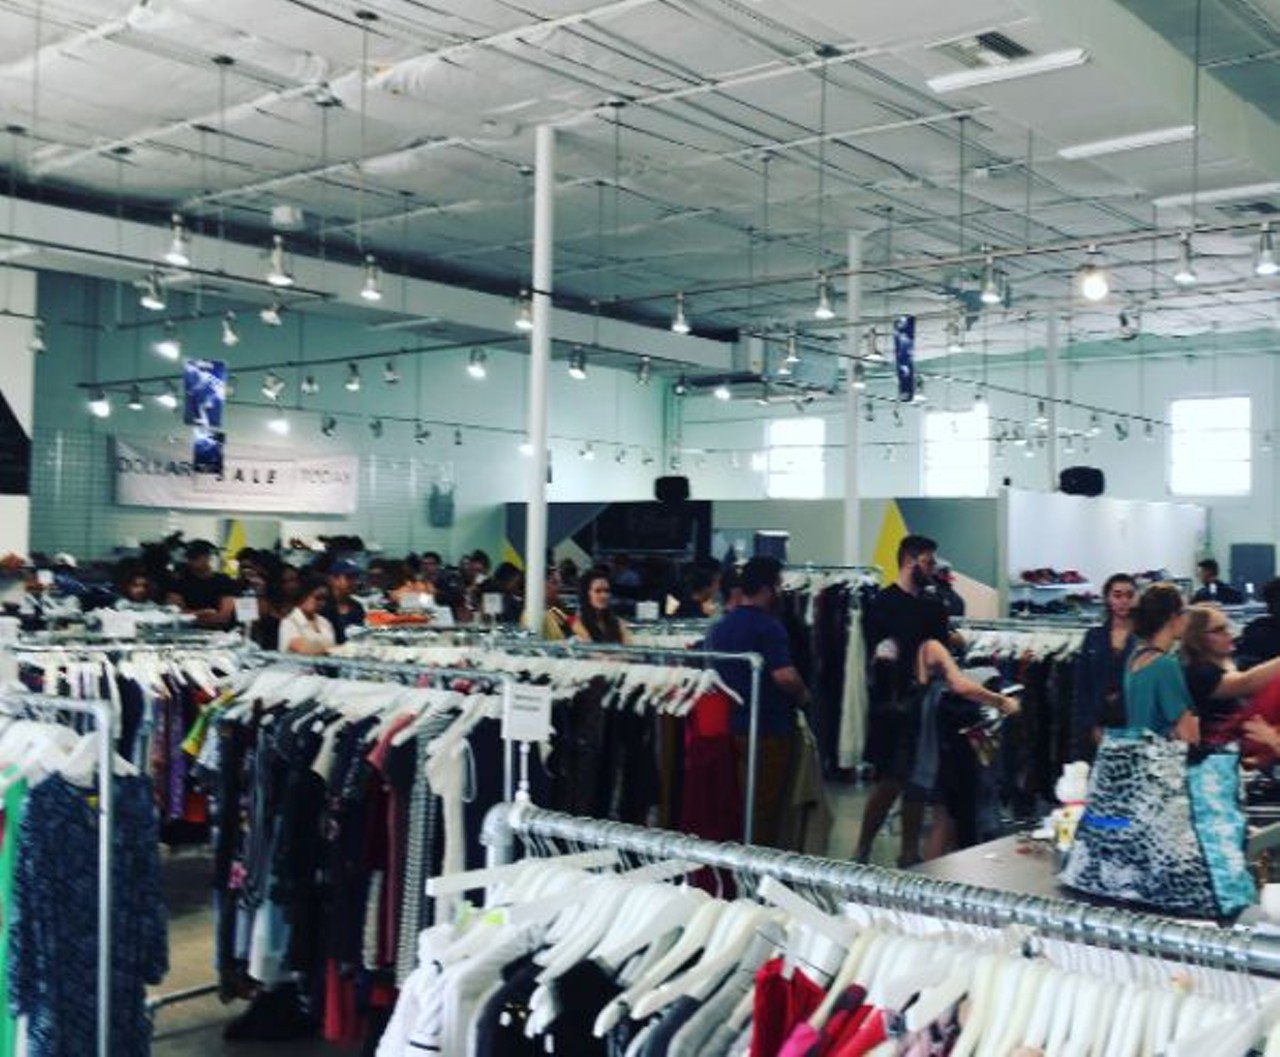 What you&#146;ll find: Some of the best men&#146;s clothing you can find in a local resale shop, including an extensive collection of Air Jordans. The store offers trendy name-brand clothing like Supreme, Zara, and Lulu Lemon, with some occasional new merchandise.
Photo via Avalon Exchange Florida/Instagram